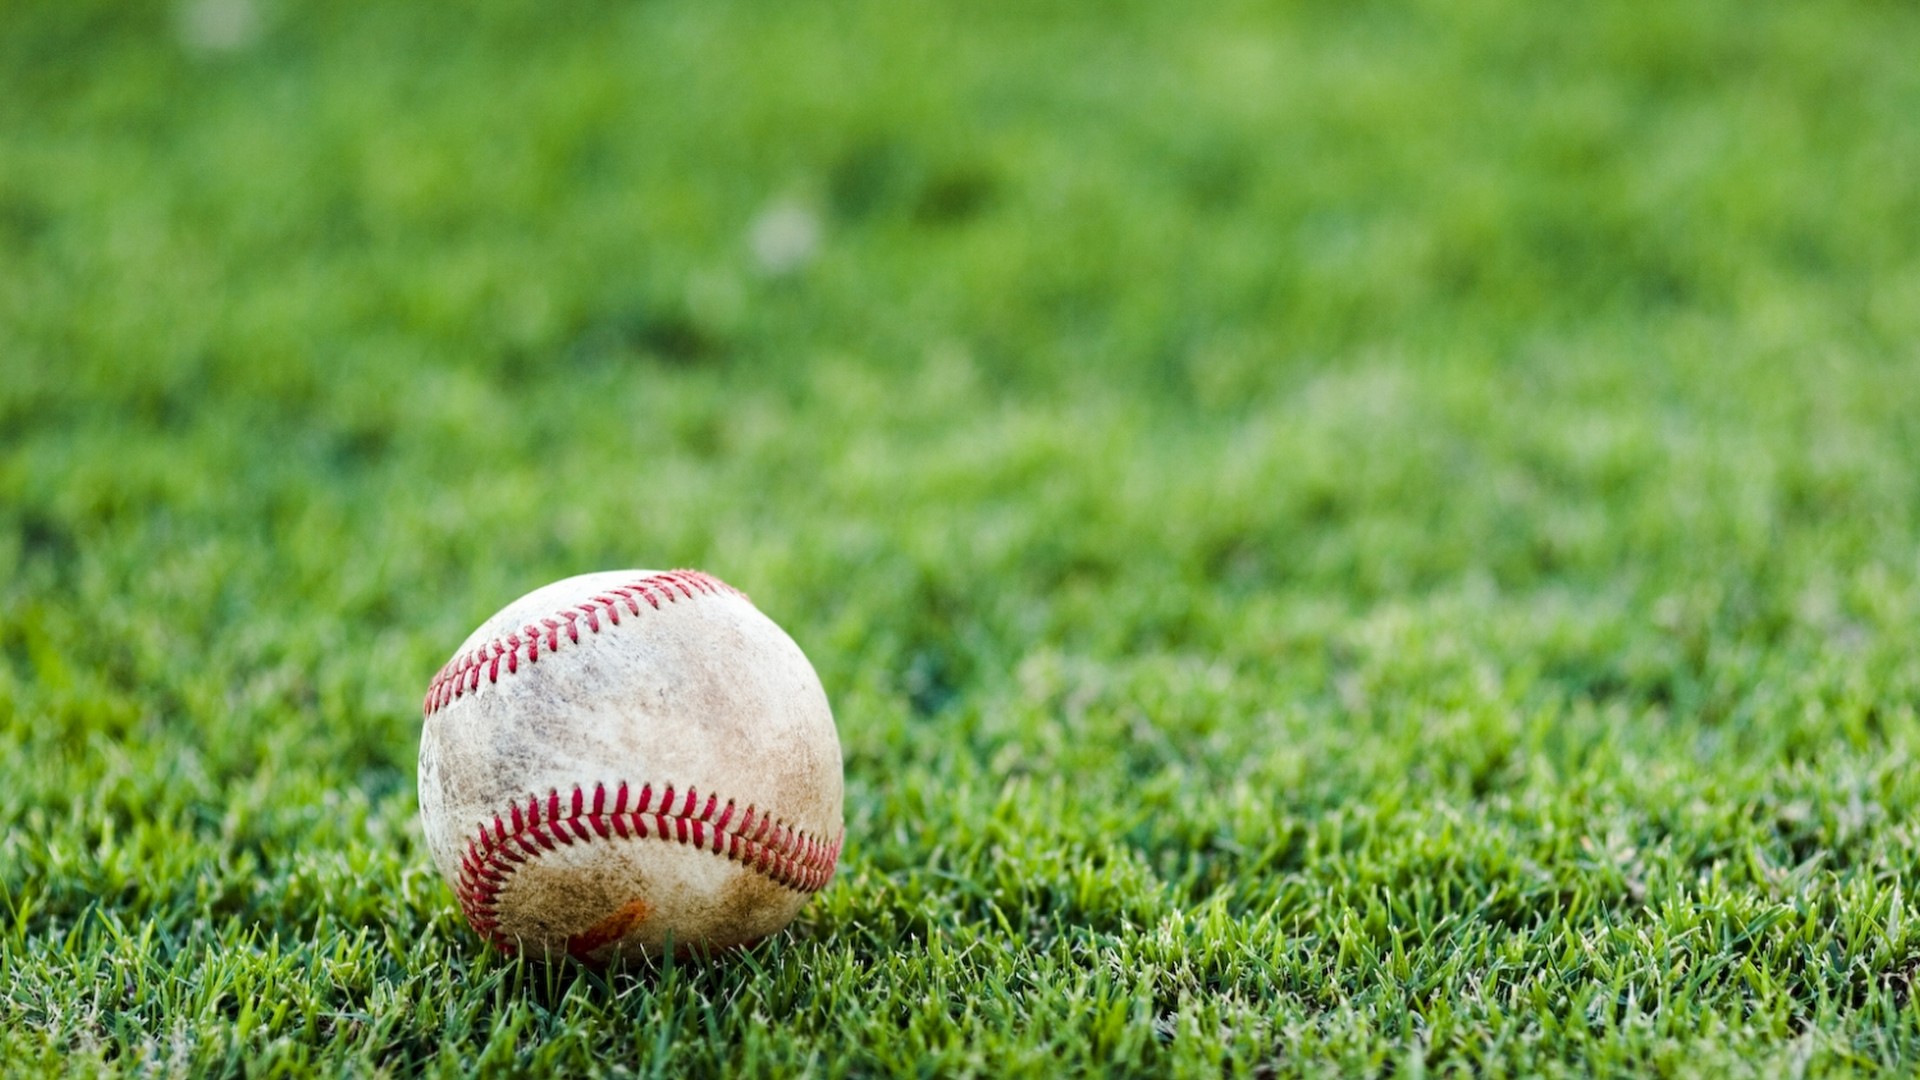 Baseball Wallpaper For Mac With high-resolution 1920X1080 pixel. You can use this wallpaper for Mac Desktop Wallpaper, Laptop Screensavers, Android Wallpapers, Tablet or iPhone Home Screen and another mobile phone device